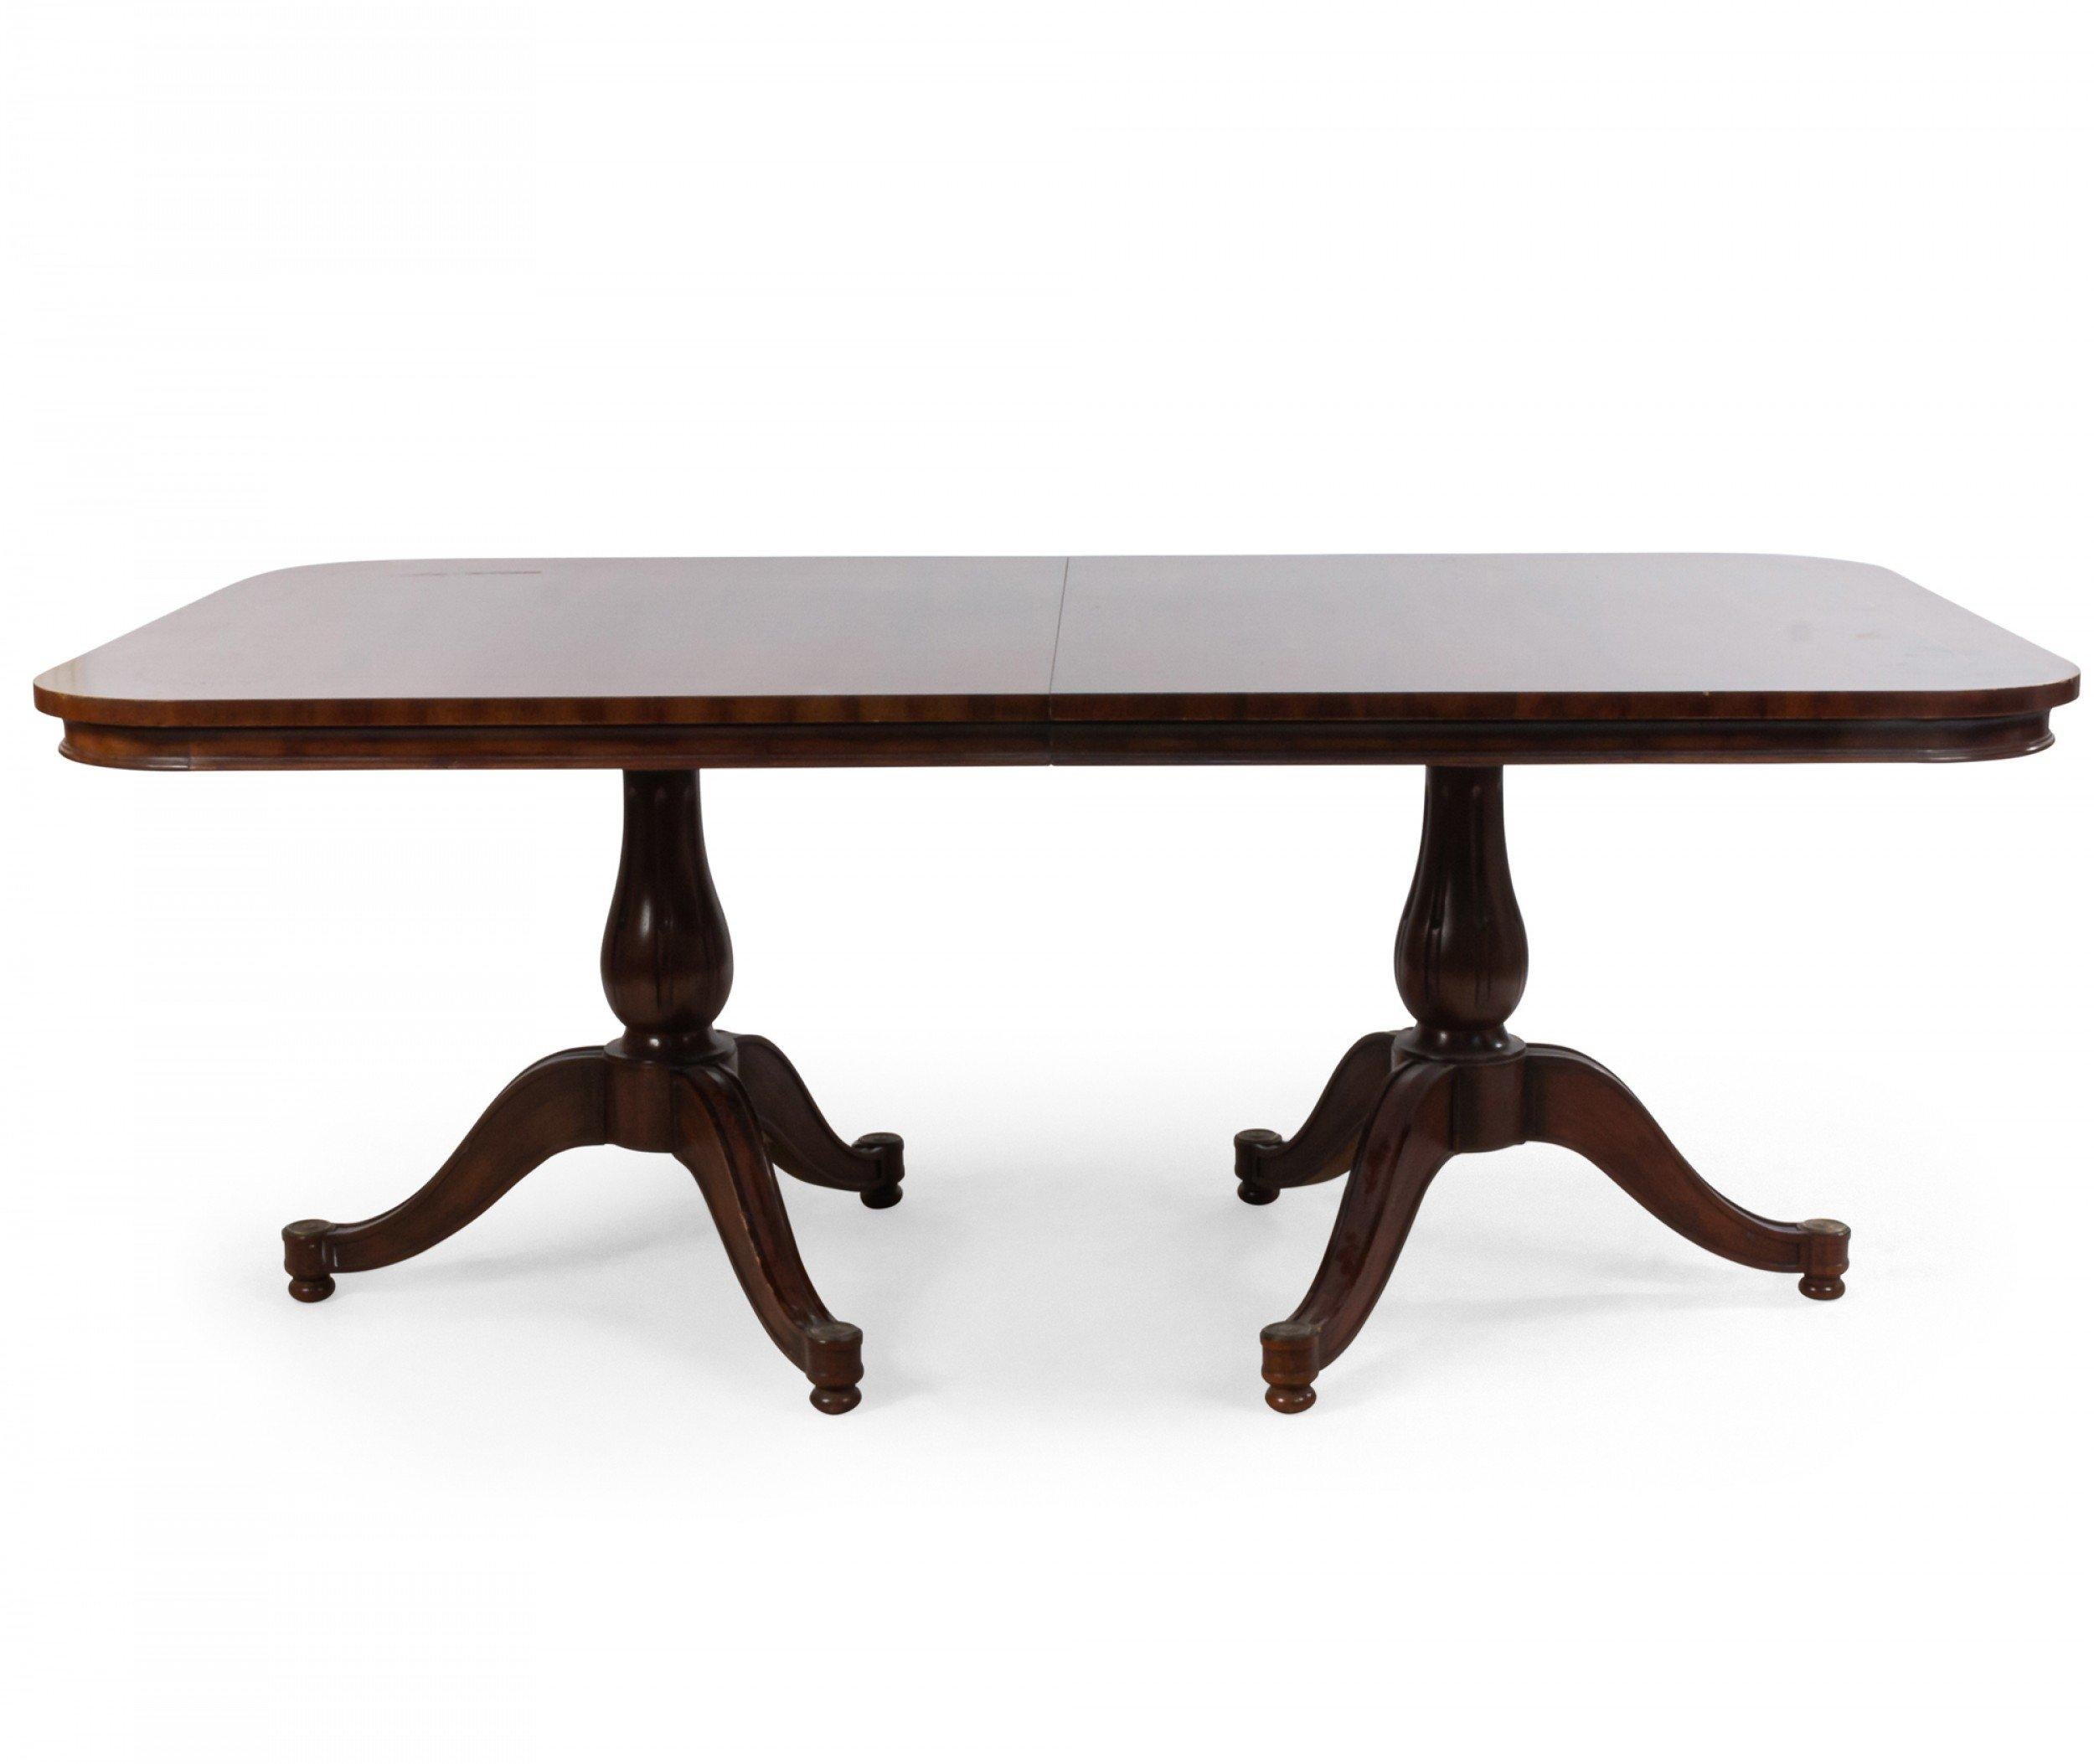 Mid-20th century English Georgian style mahogany conference / dining table with a ½